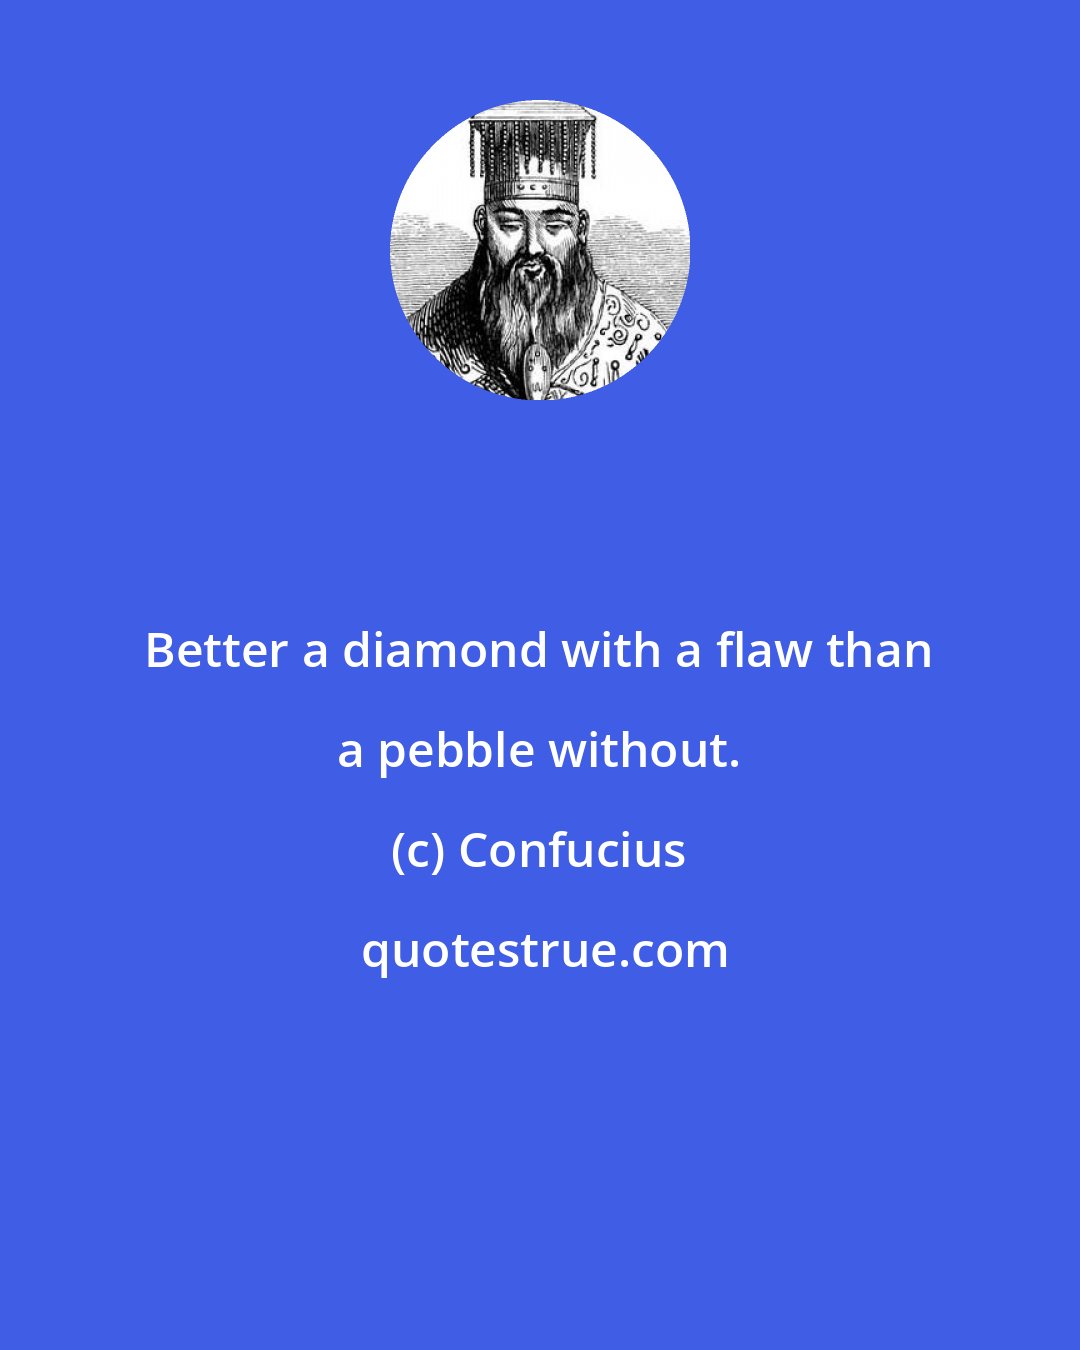 Confucius: Better a diamond with a flaw than a pebble without.